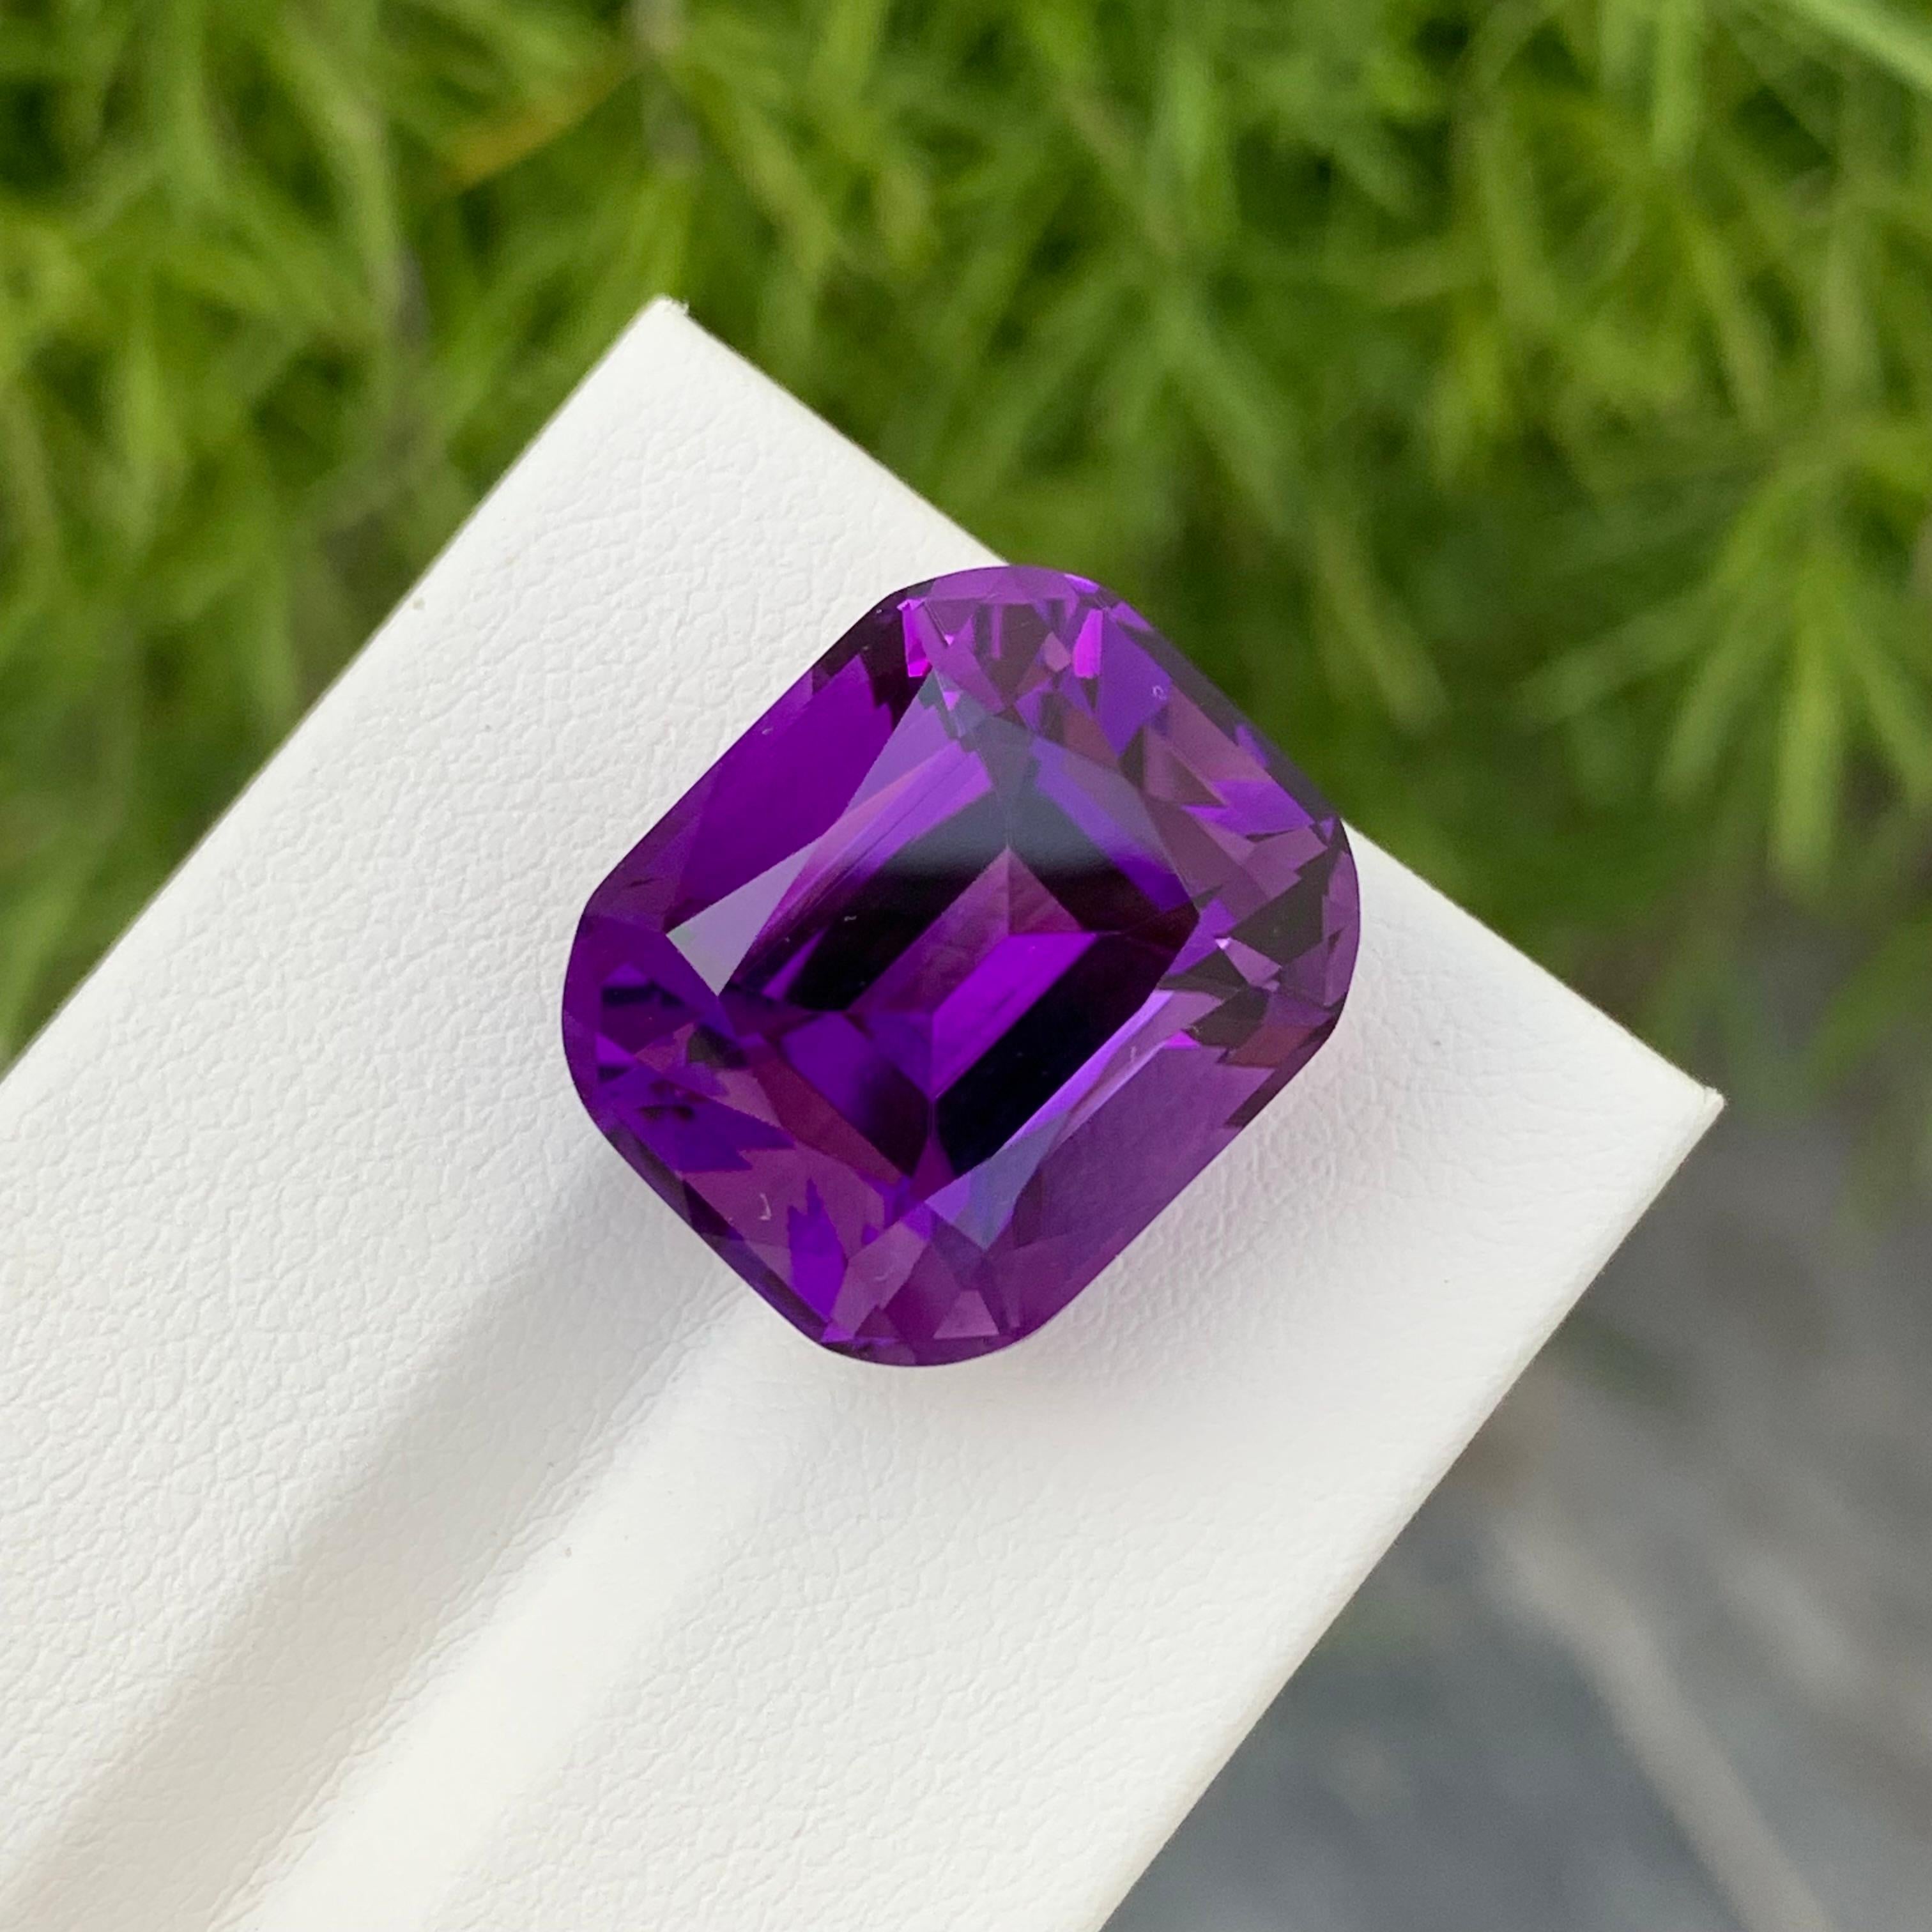 Loose Amethyst
Weight: 20.60 Carats
Dimension: 17.7 x 14.9 x 12.3 Mm
Colour: Purple
Origin: Brazil
Treatment: Non
Certificate: On Demand
Shape: Cushion 

Amethyst, a stunning variety of quartz known for its mesmerizing purple hue, has captivated